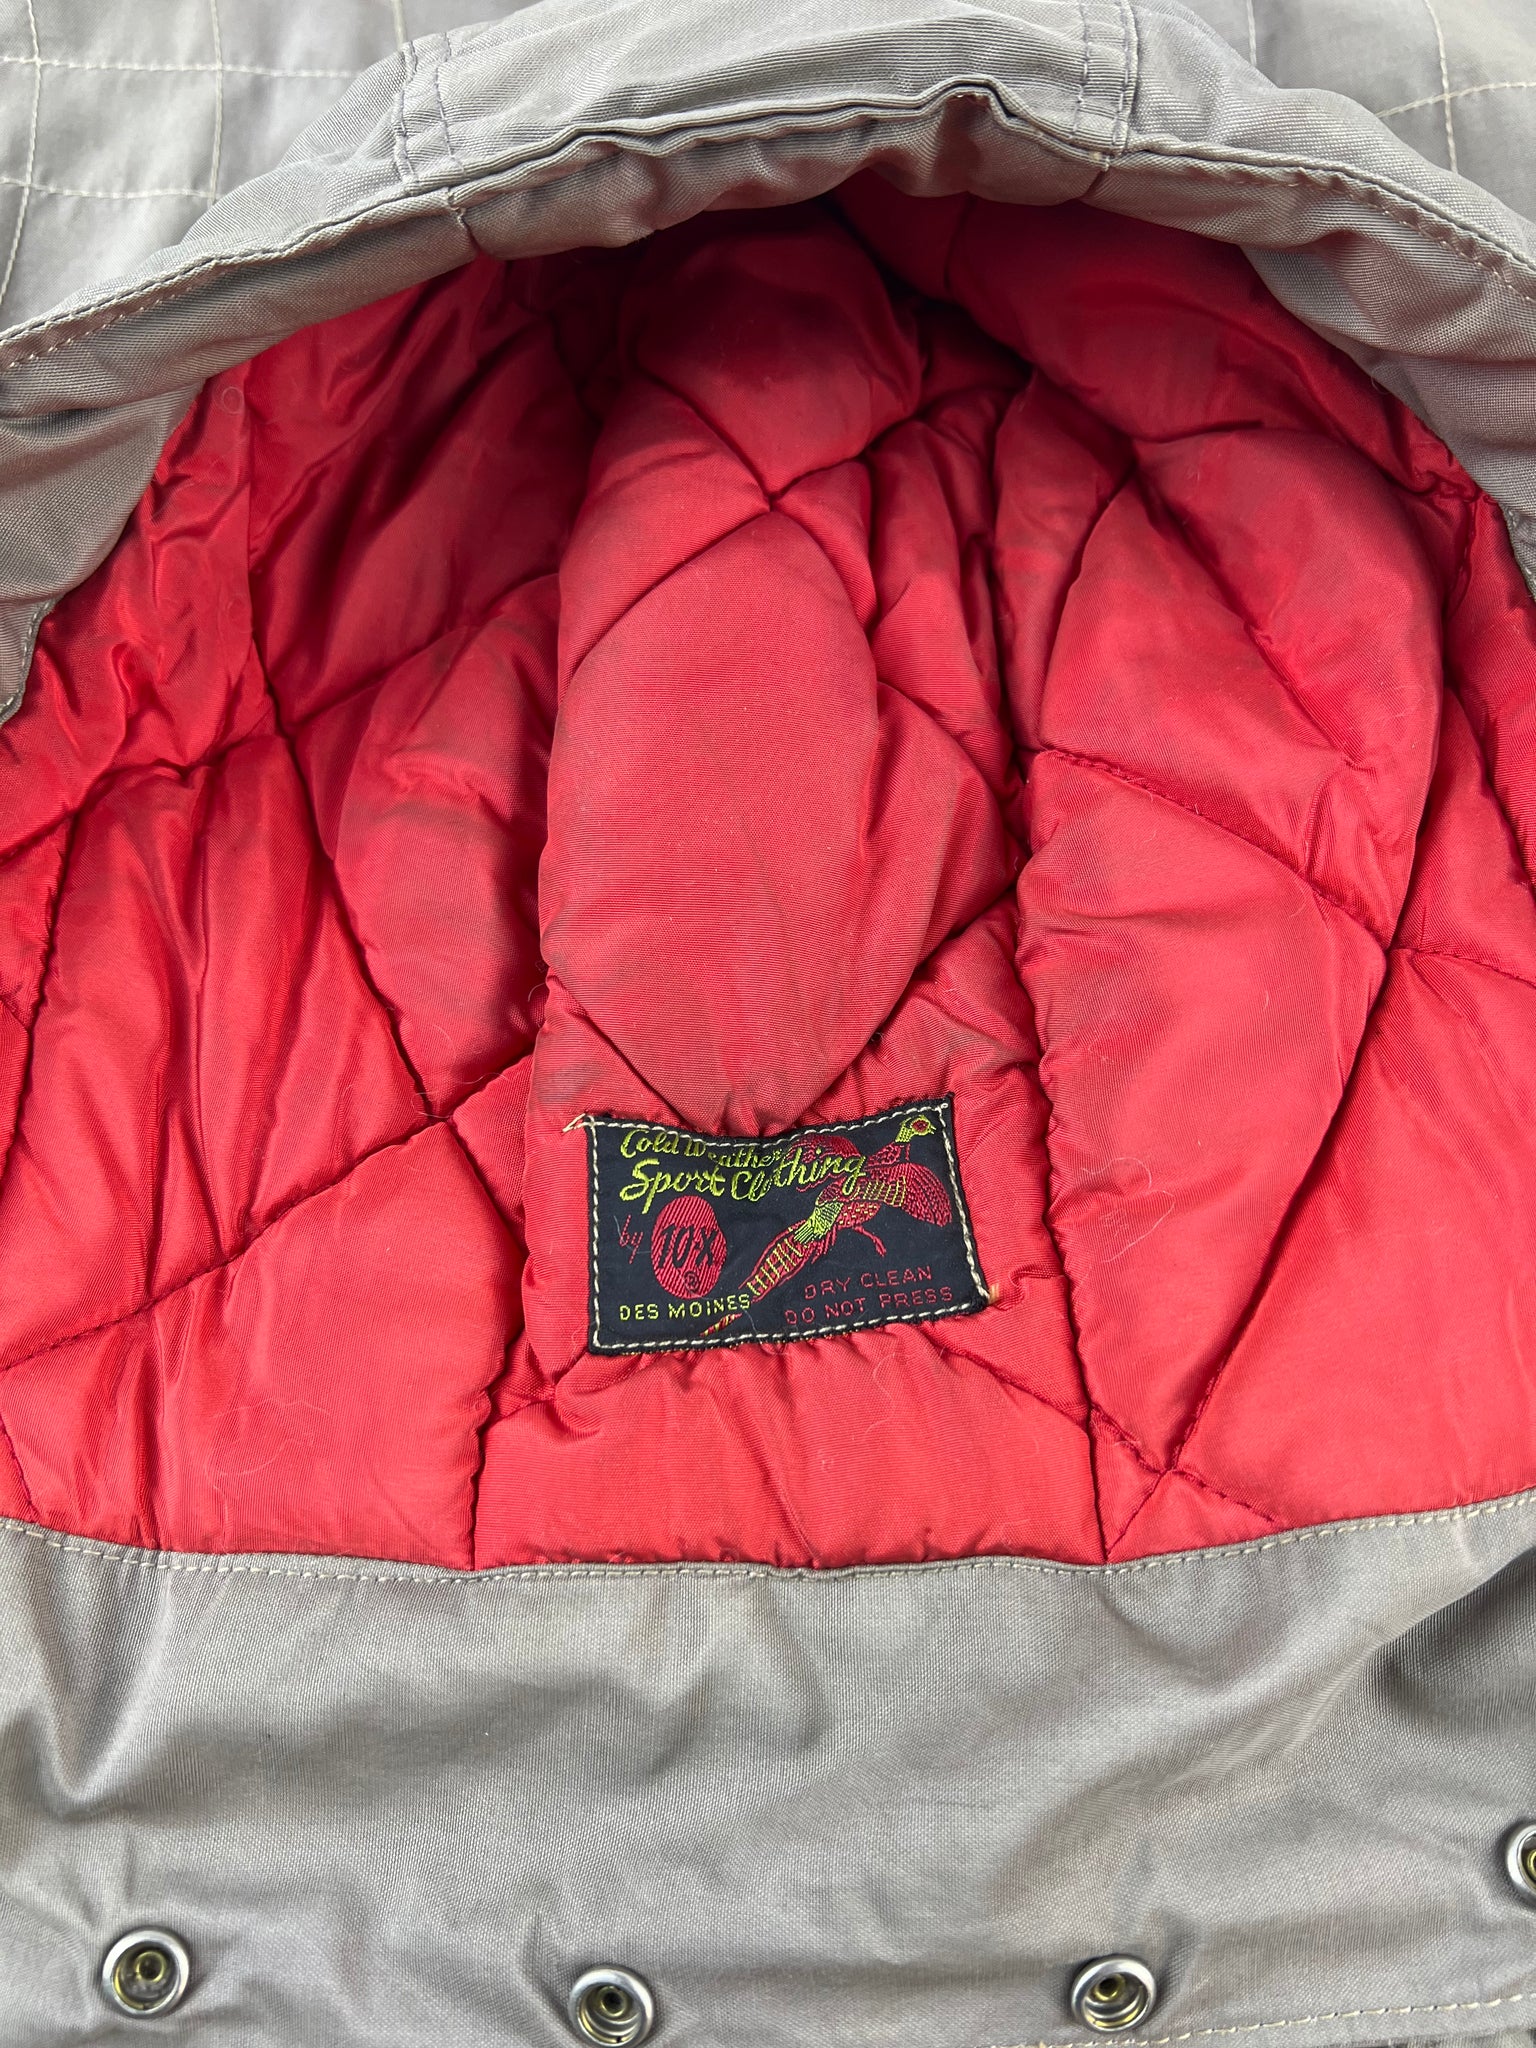 50s/60s 10x hooded outdoor jacket fits L